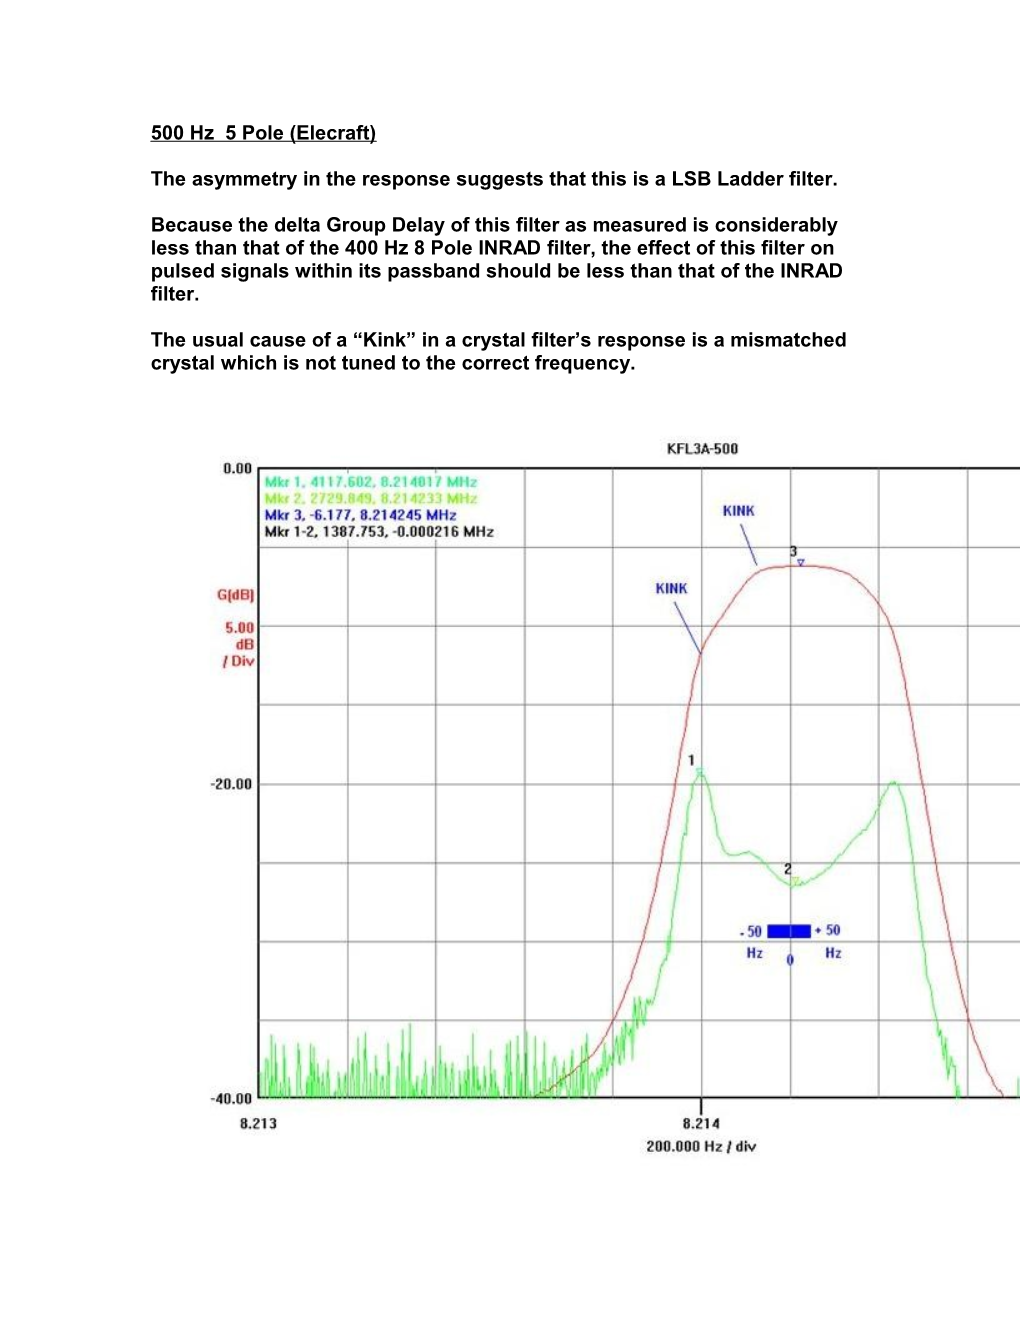 The Asymmetry in the Response Suggests That This Is a LSB Ladder Filter